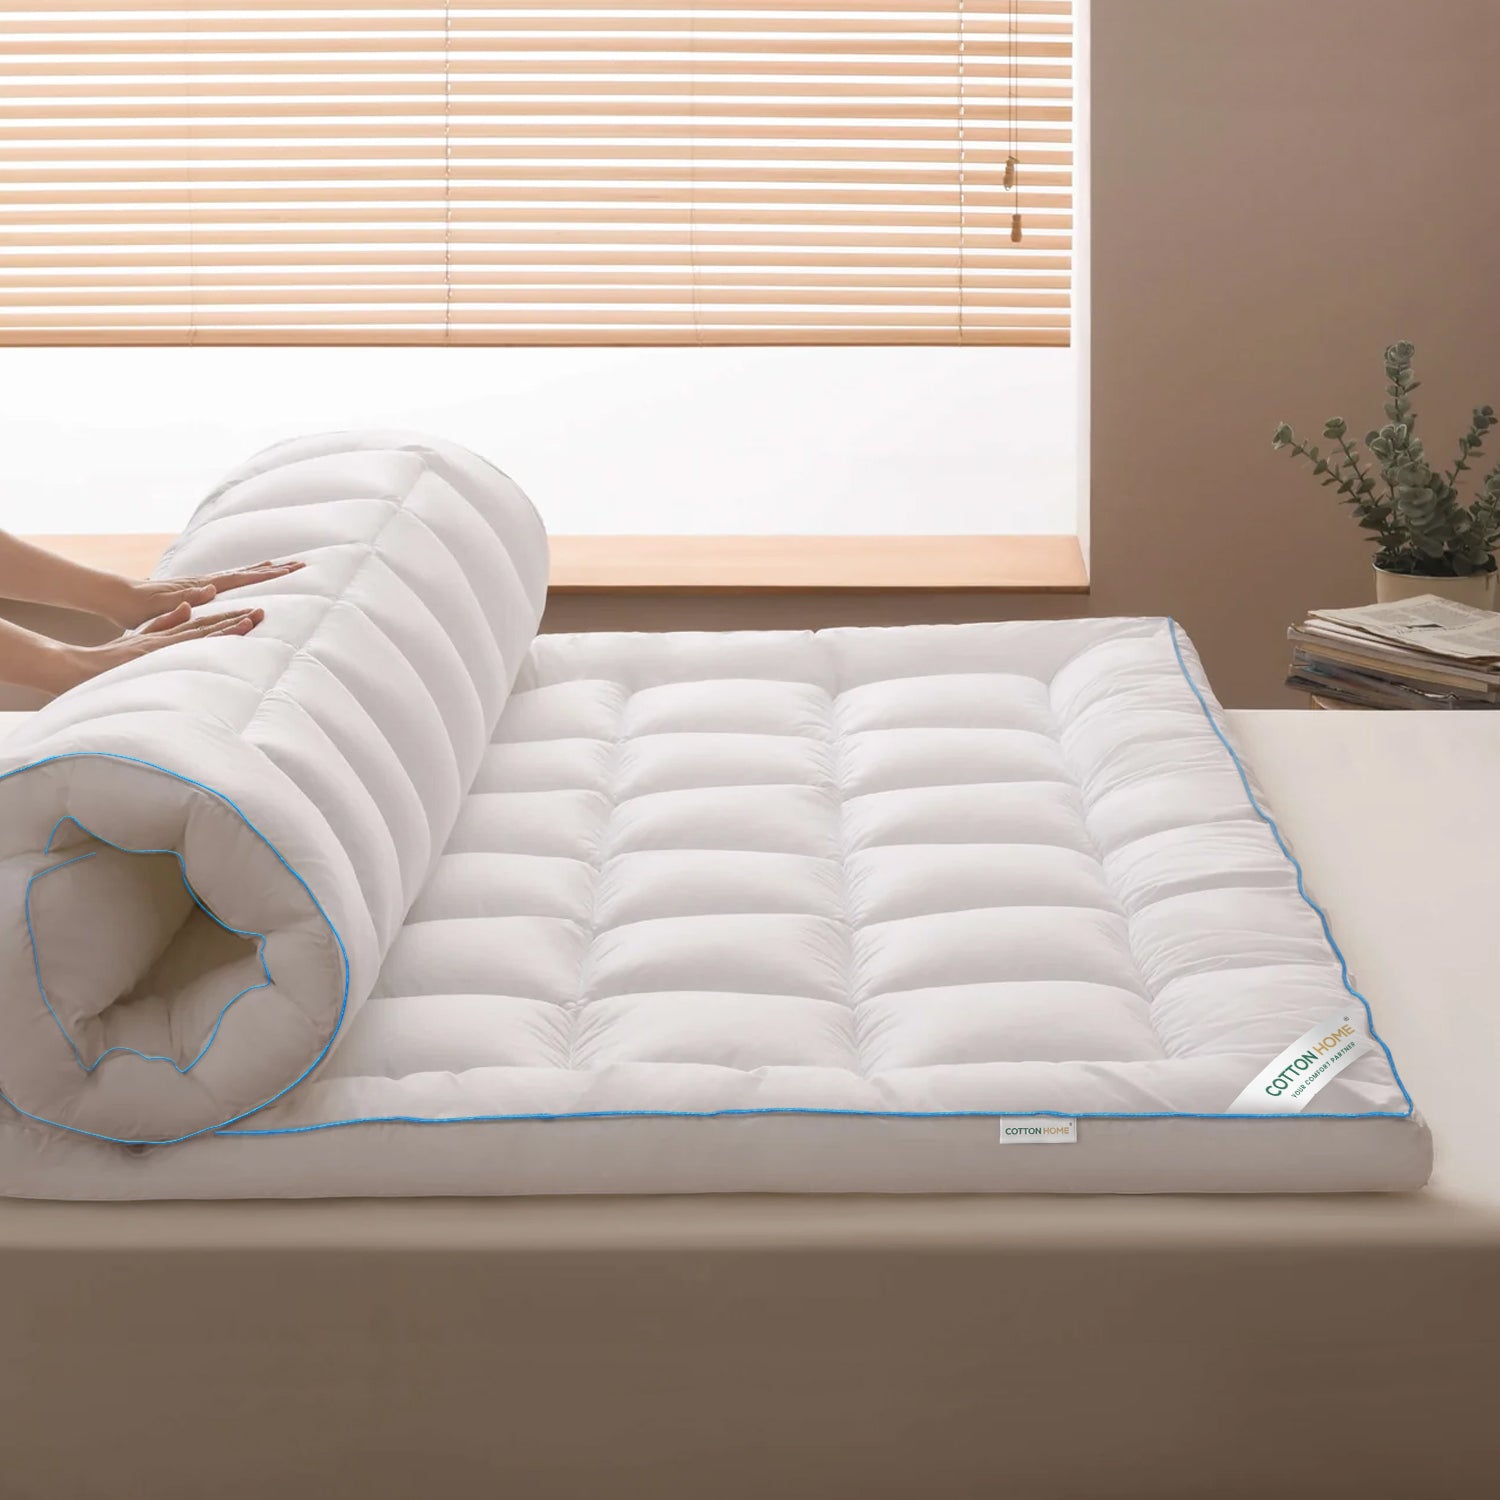 Gel Mattress Topper 8cm Thickness - 180x200cm White with Blue Cord